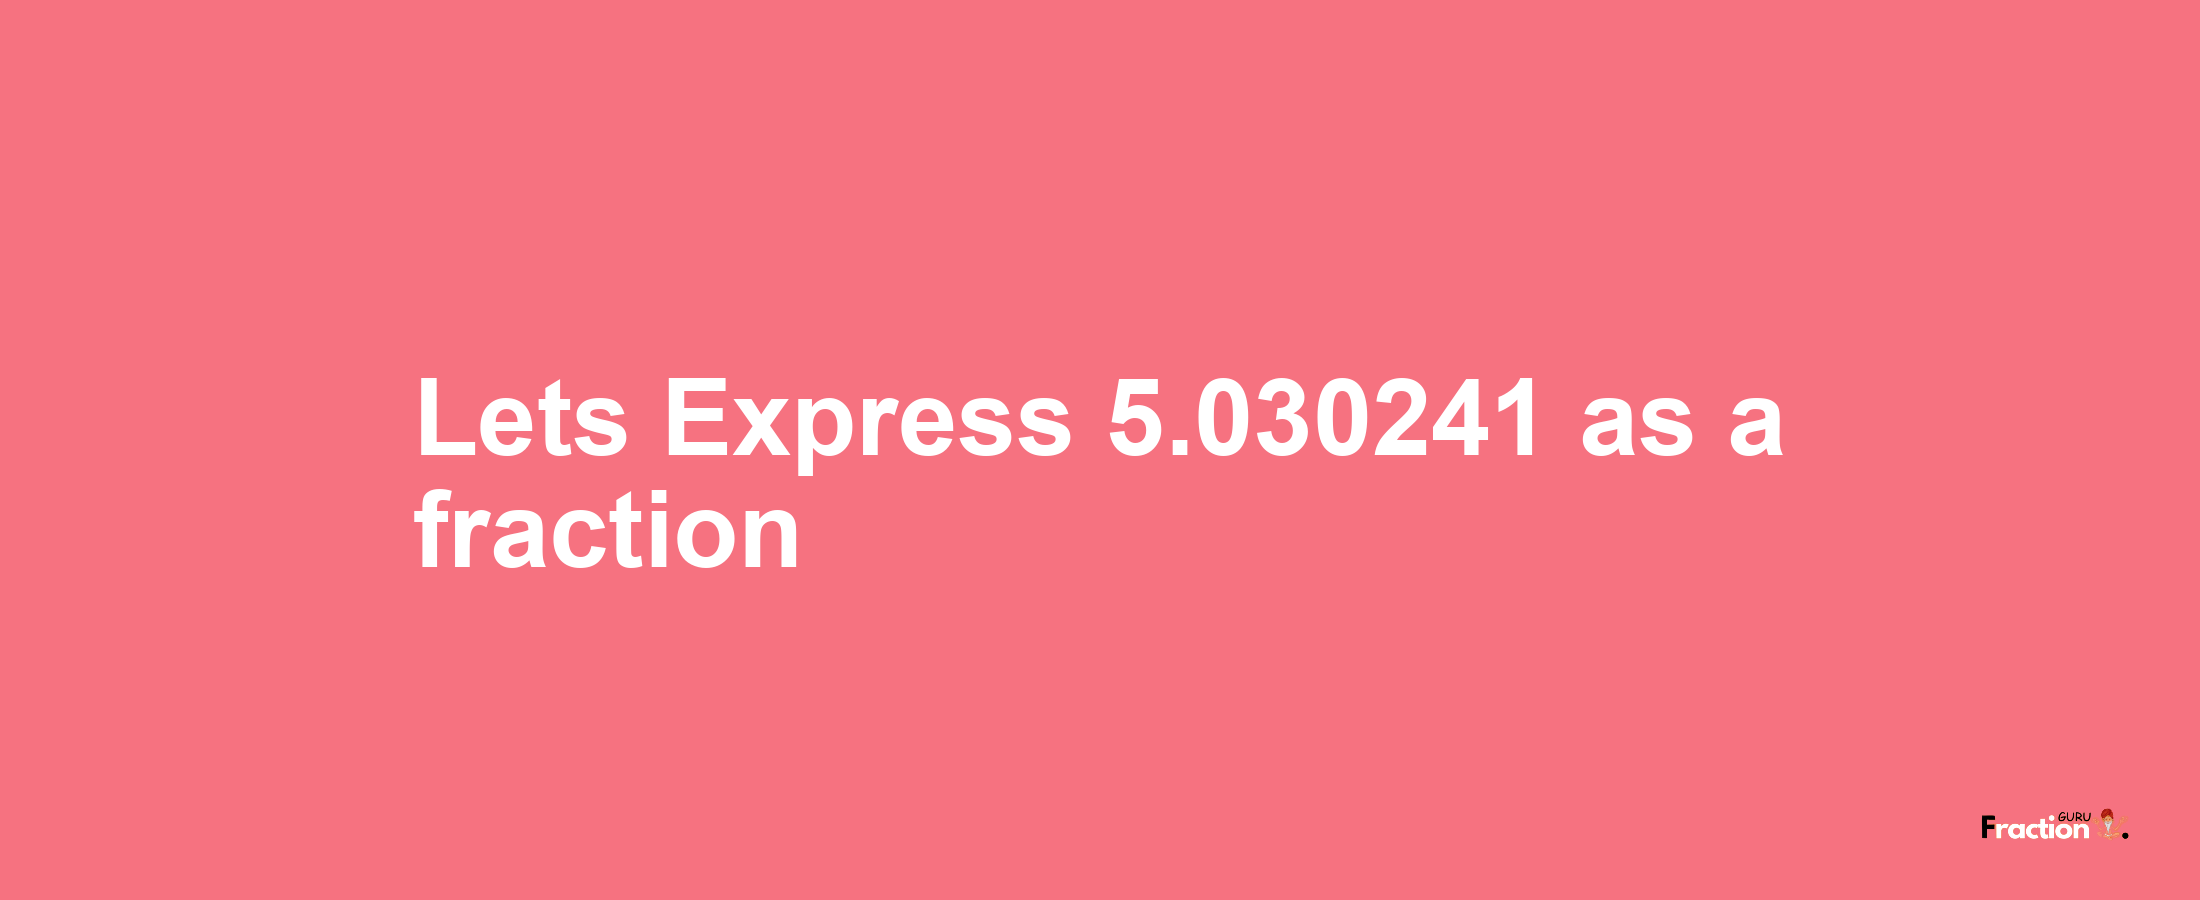 Lets Express 5.030241 as afraction